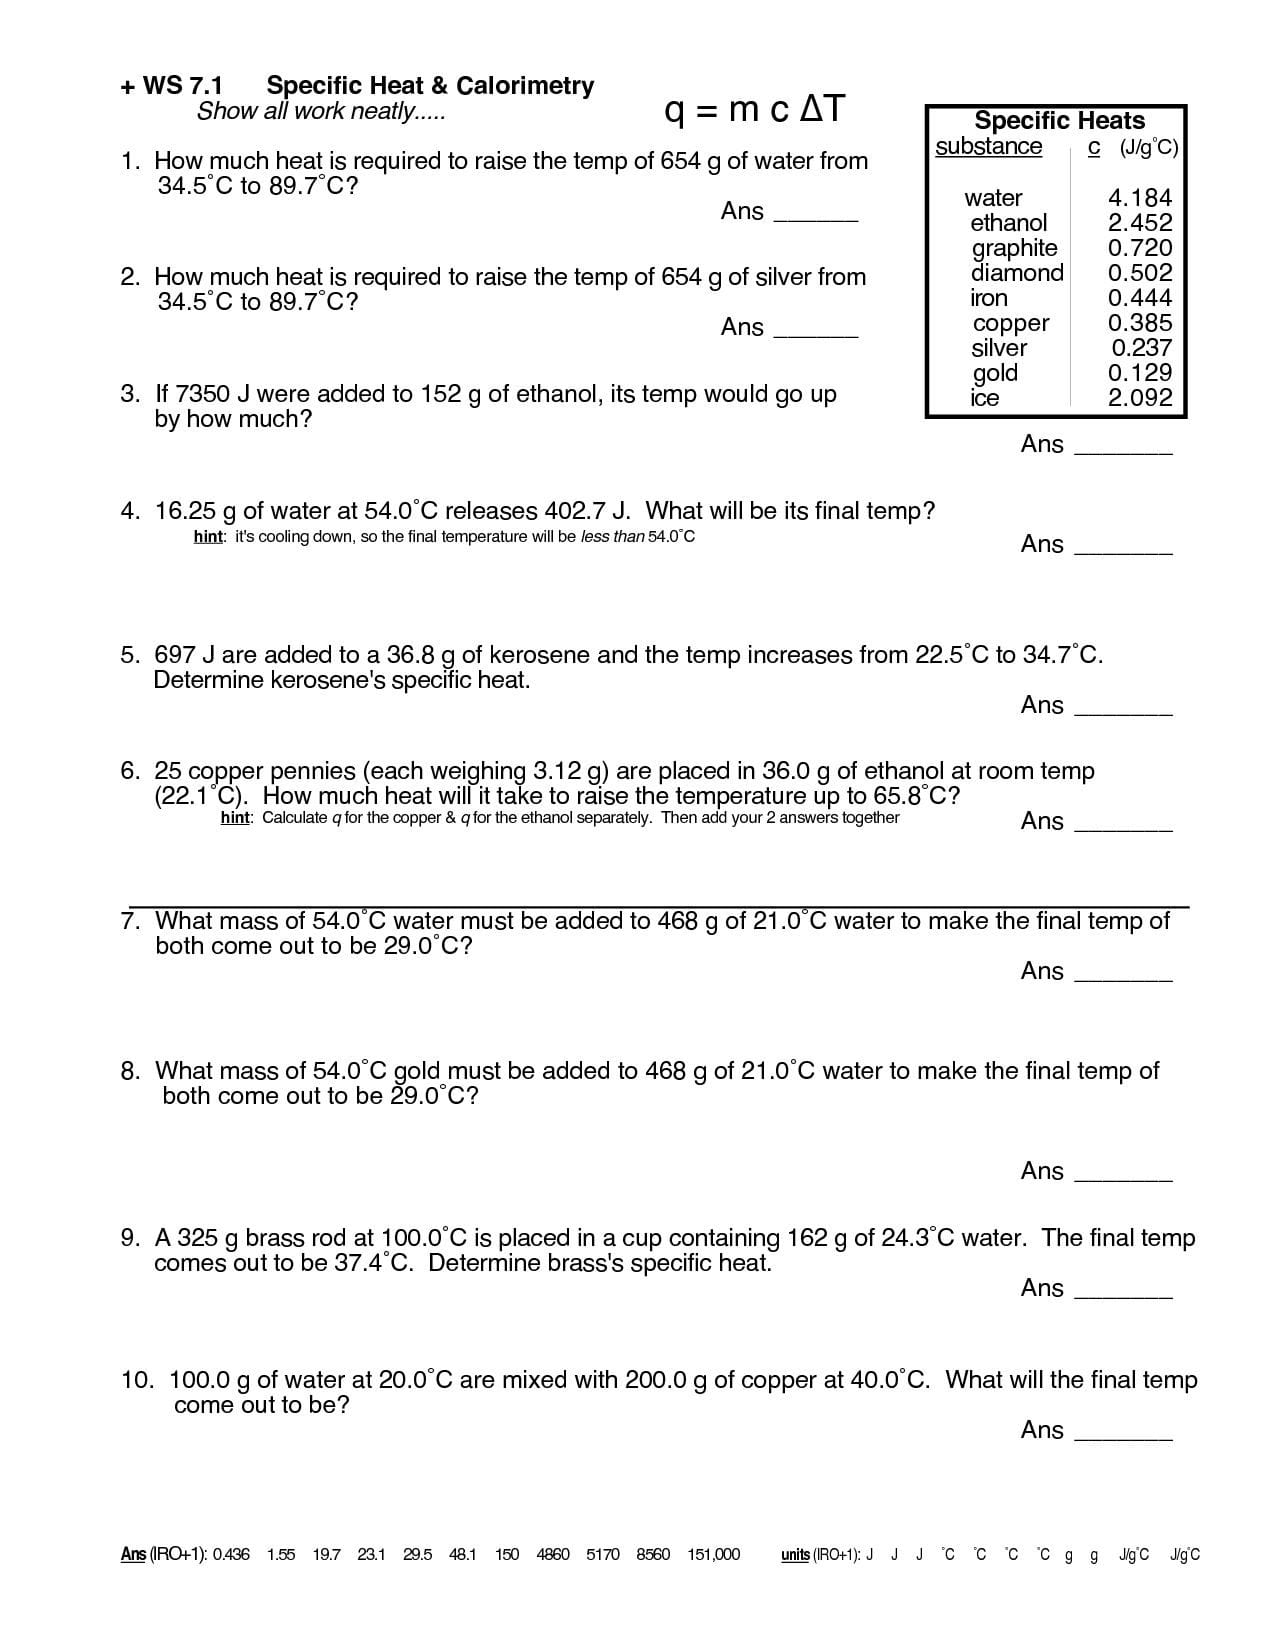 Worksheet Introduction To Specific Heat Capacities excelguider com